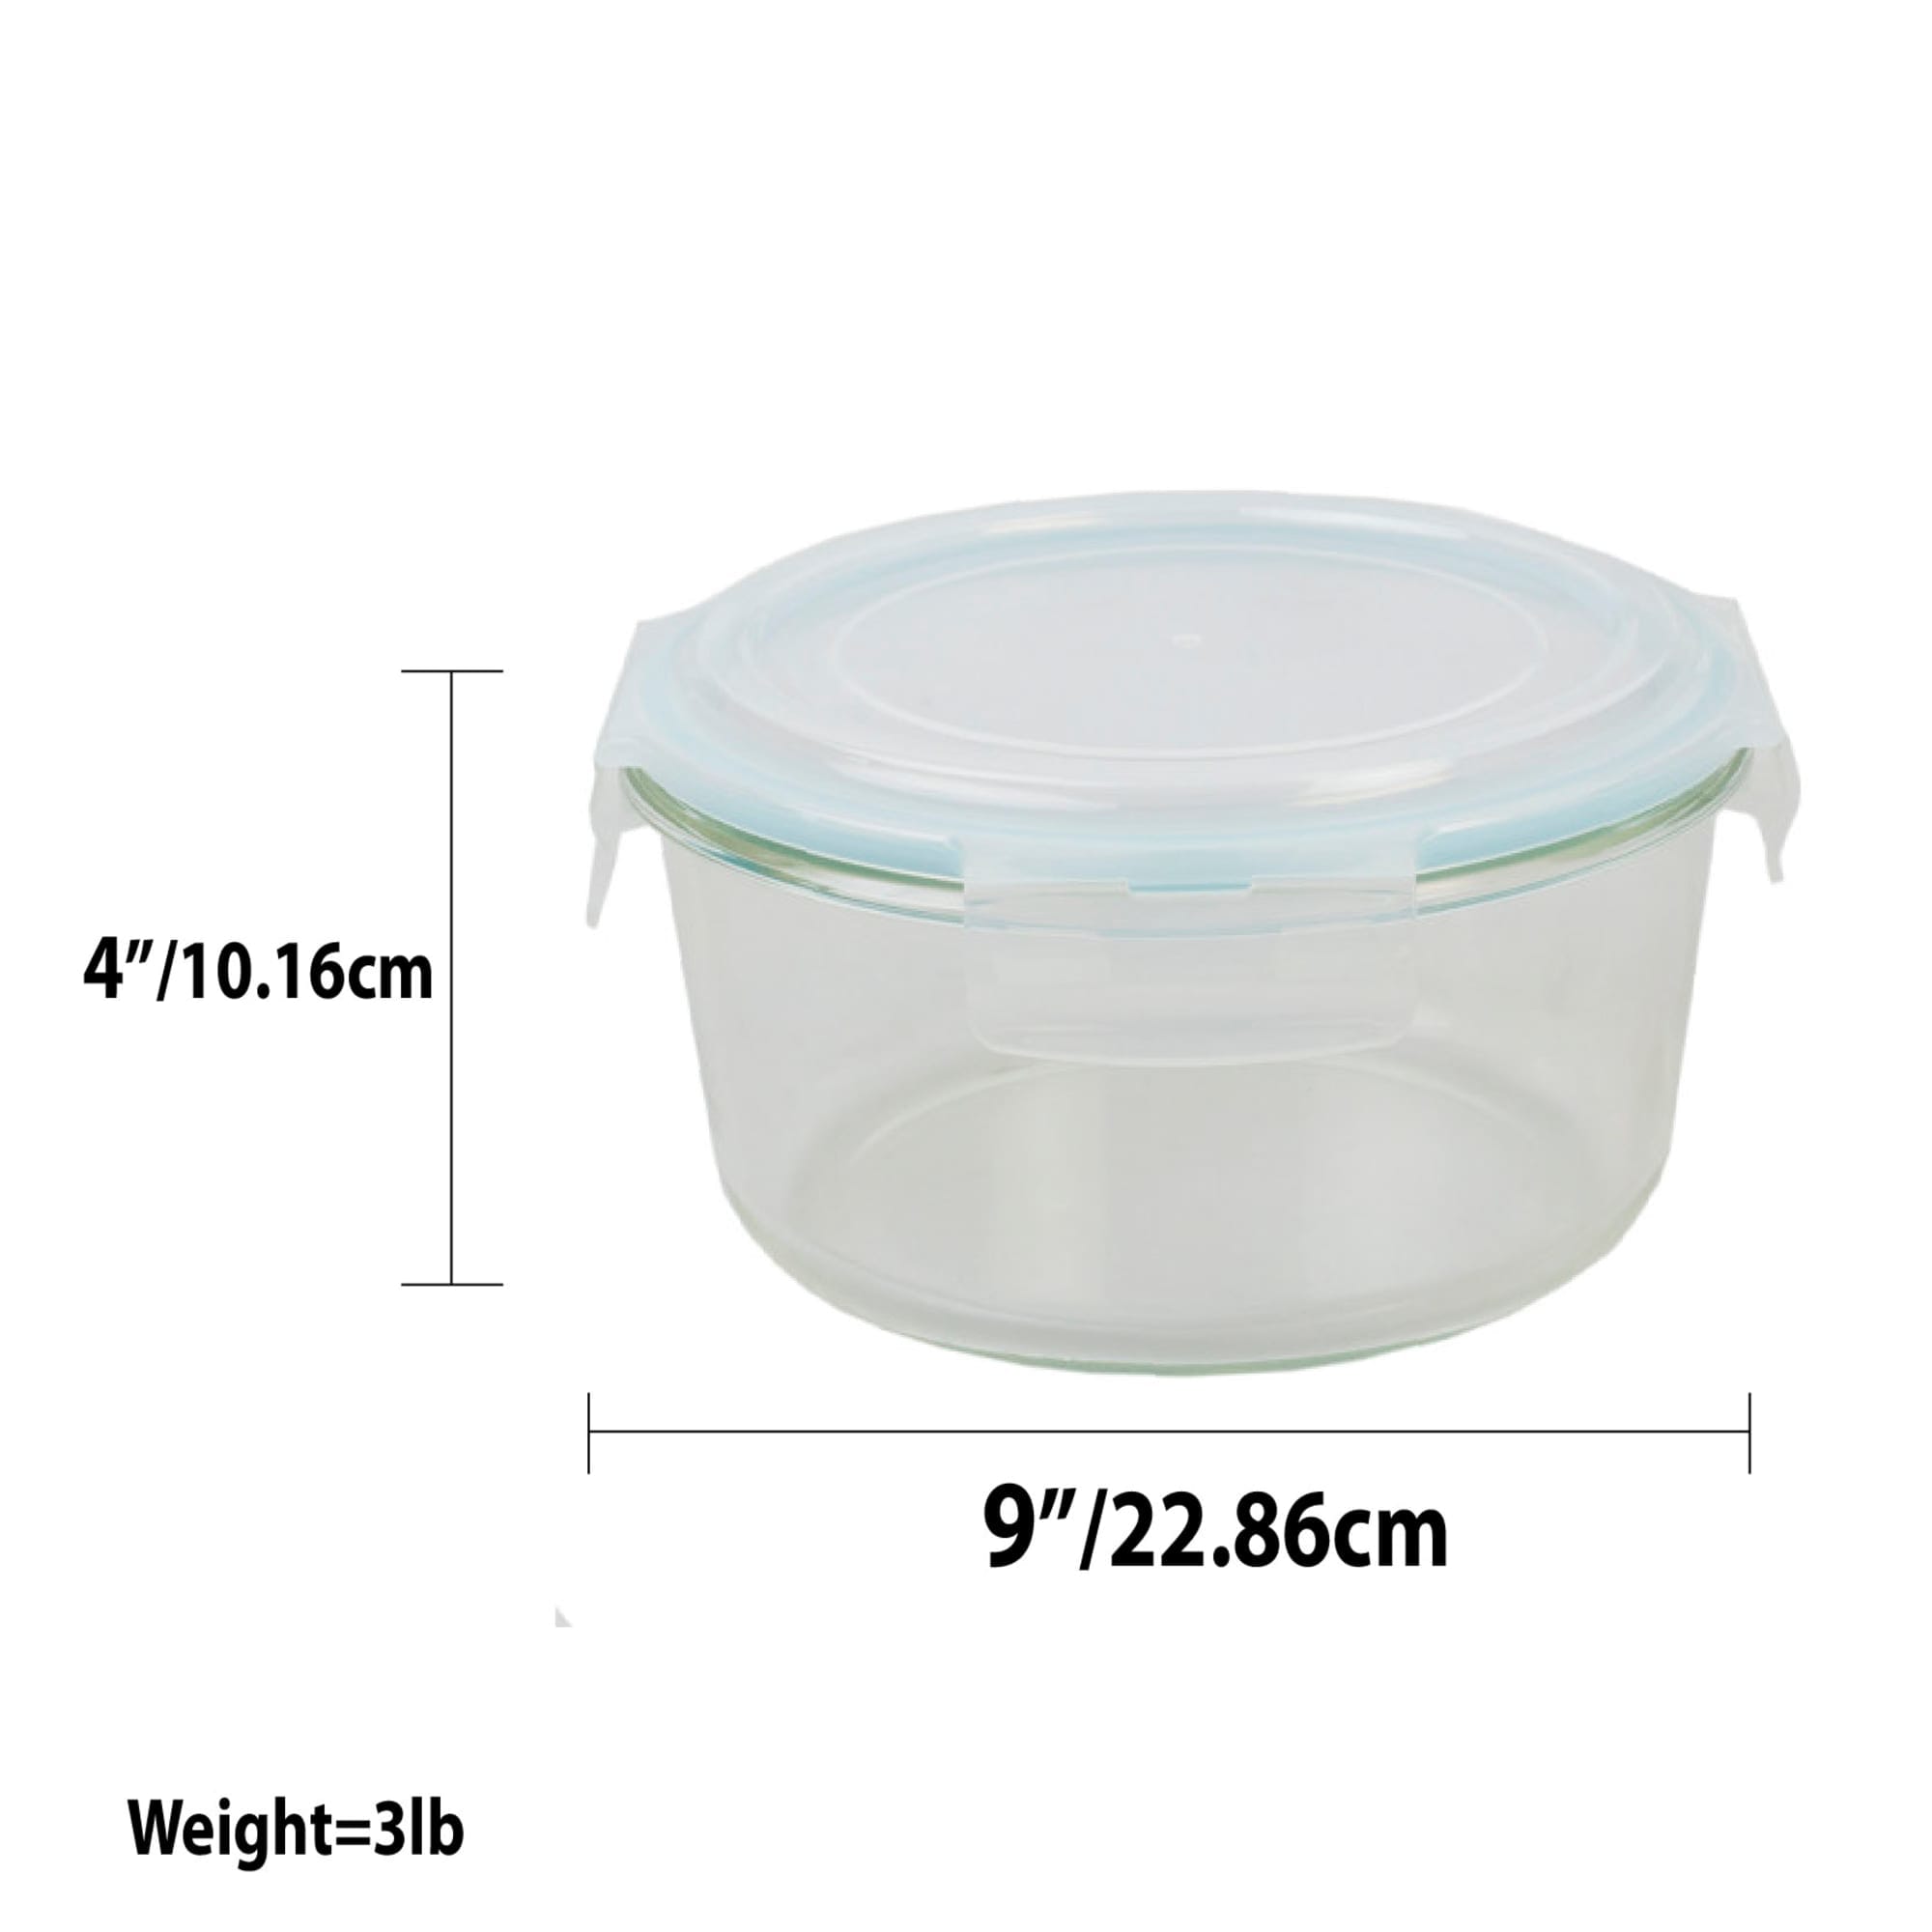 Home Basics 59 oz. Round Borosilicate Glass Food Storage Container with  Leak-Proof and Air-Tight Plastic Locking Lid $7.00 EACH, CASE PACK OF 12